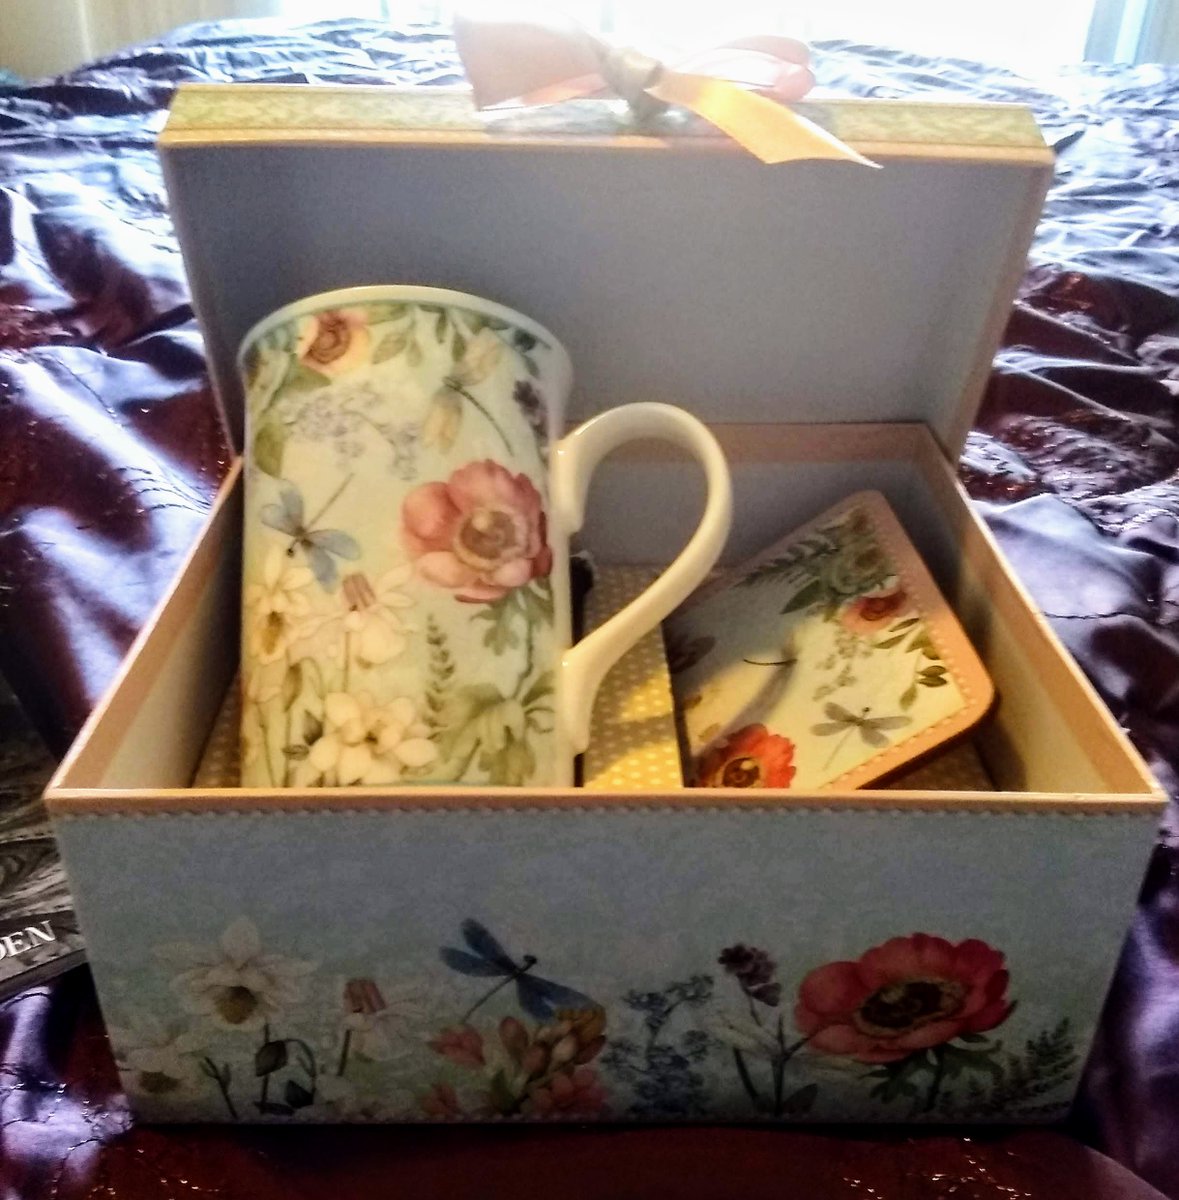 Still time for Mother's Day! NEW RARE Porcelain Dragonfly & Poppy Mug, Spoon & Coaster Set Summer River BV - Only One Available

#SummerRiver #BVCopyright #MiShonsGalleria #NewMugSet #dragonfly #poppies #dragonfiesPoppies #floralcup 

ebay.com/itm/1847377135…